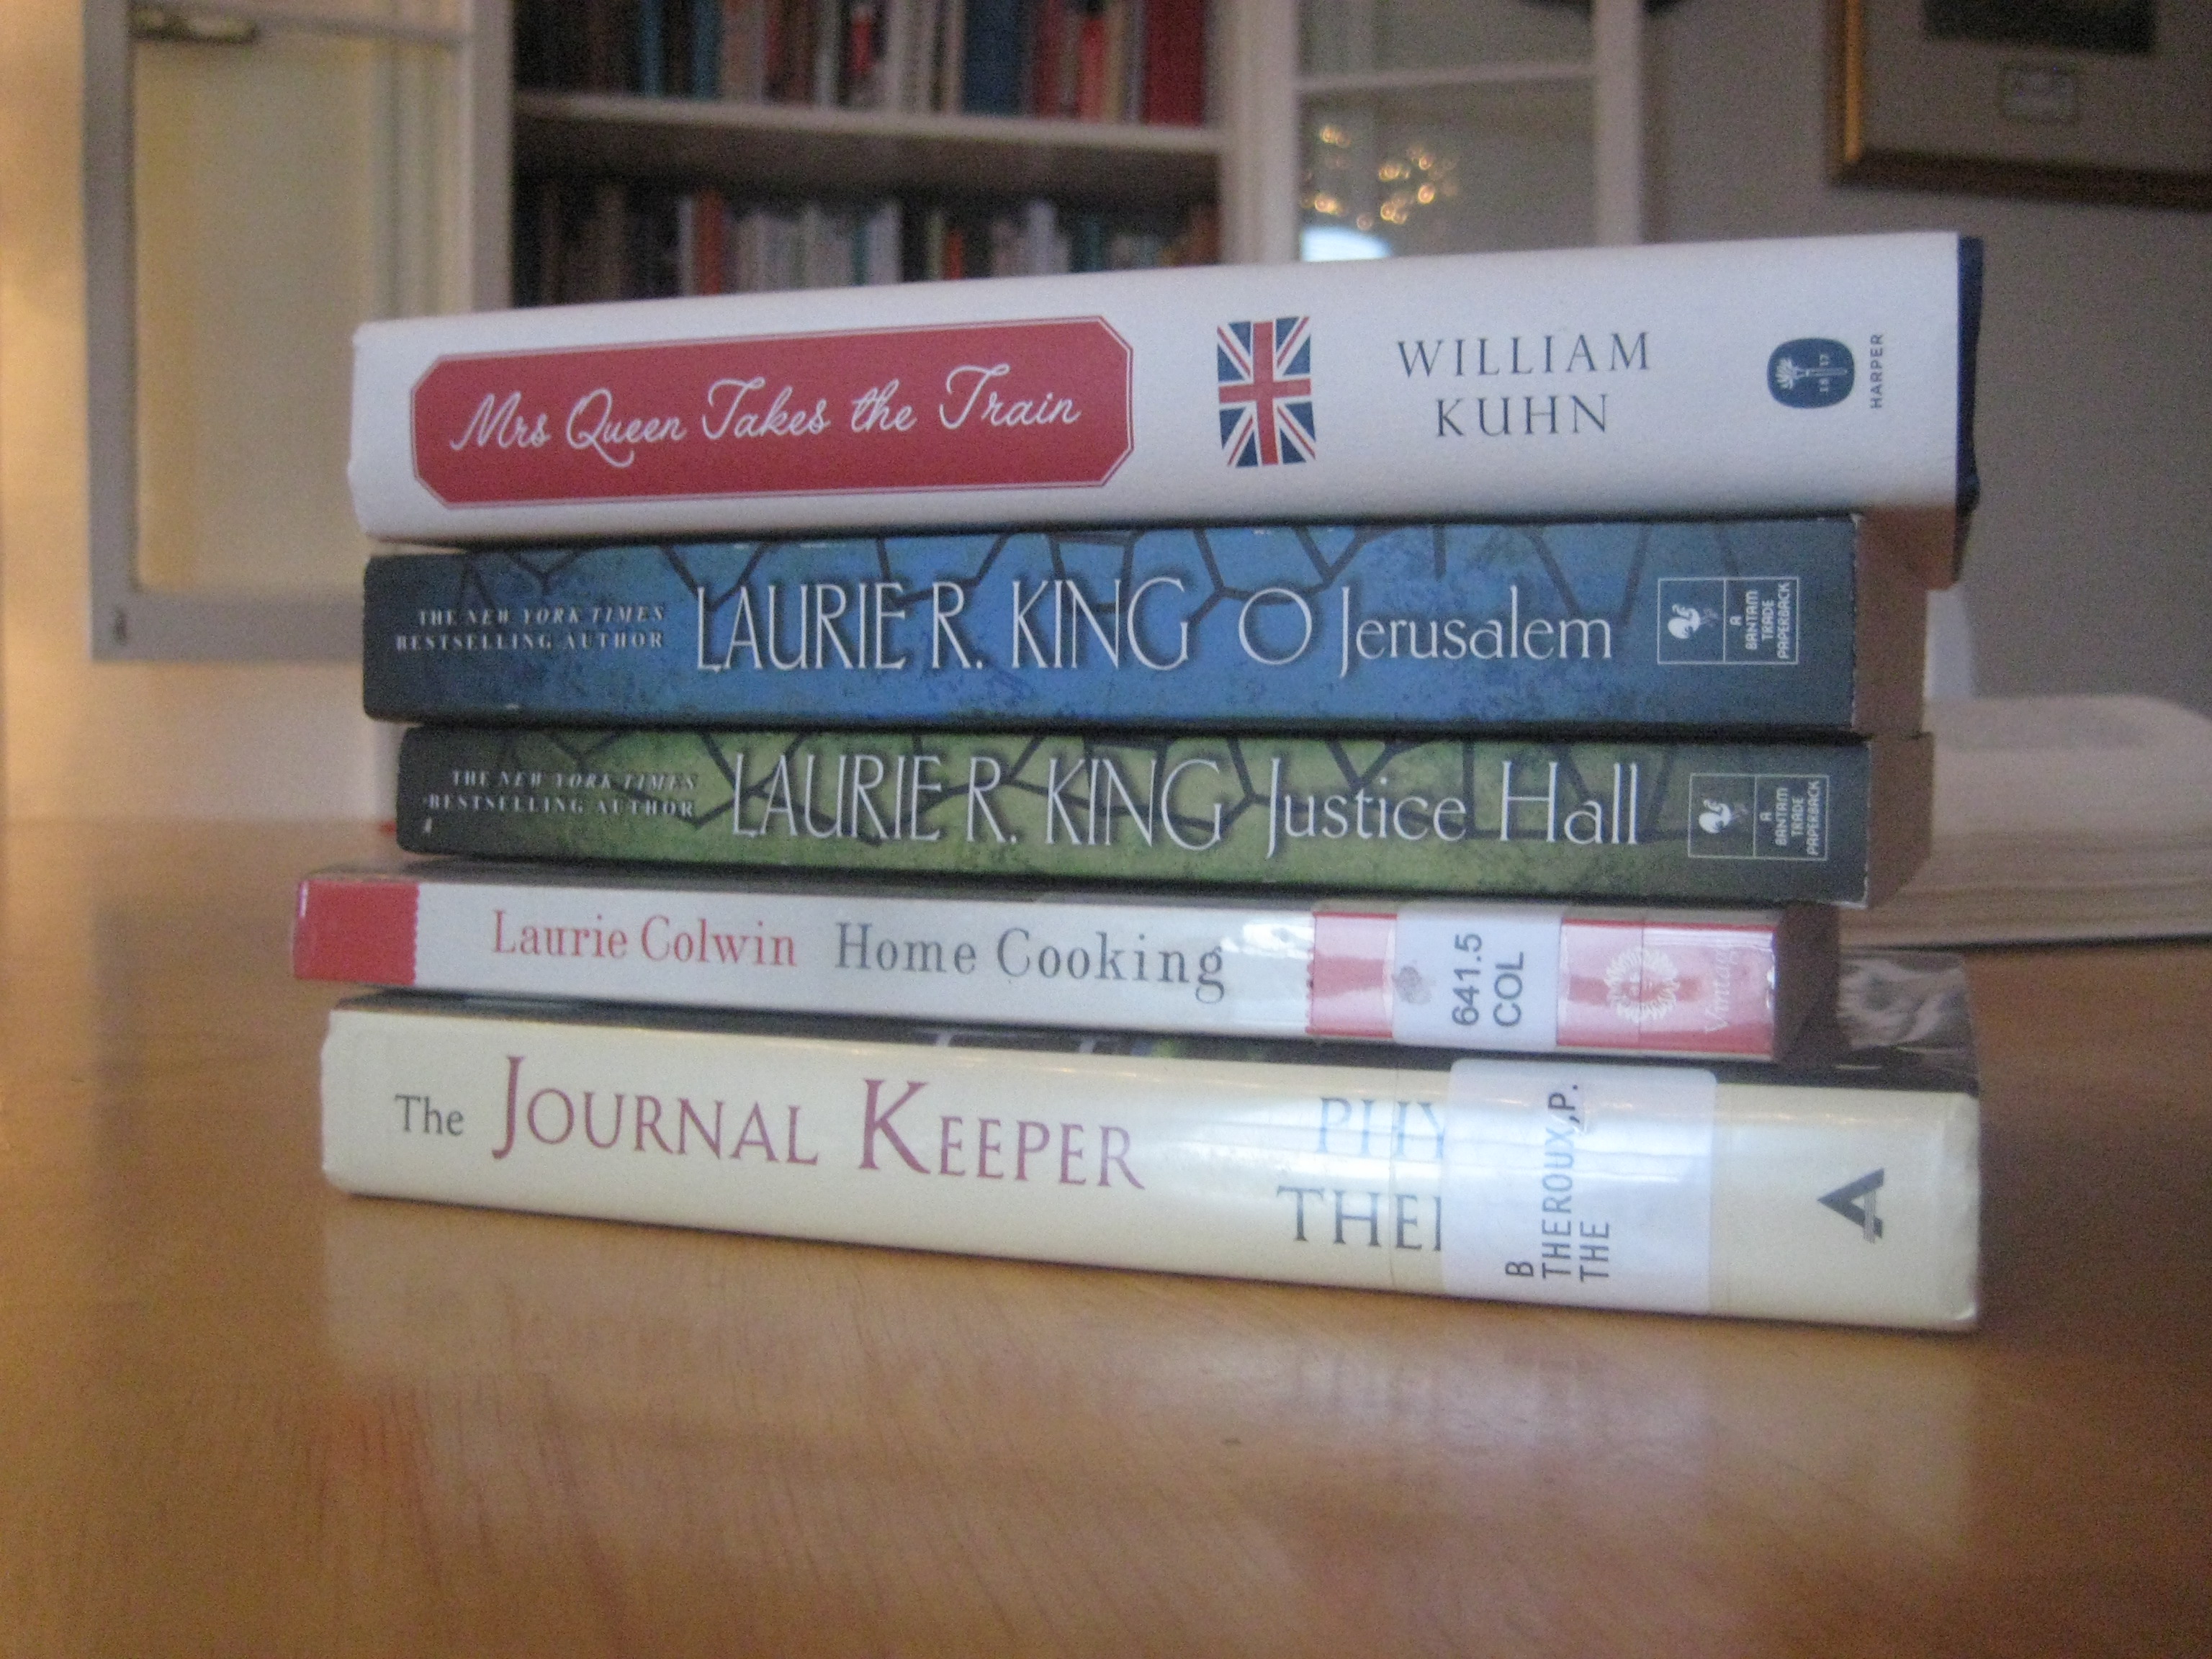 october books mary russell laurie colwin mrs queen